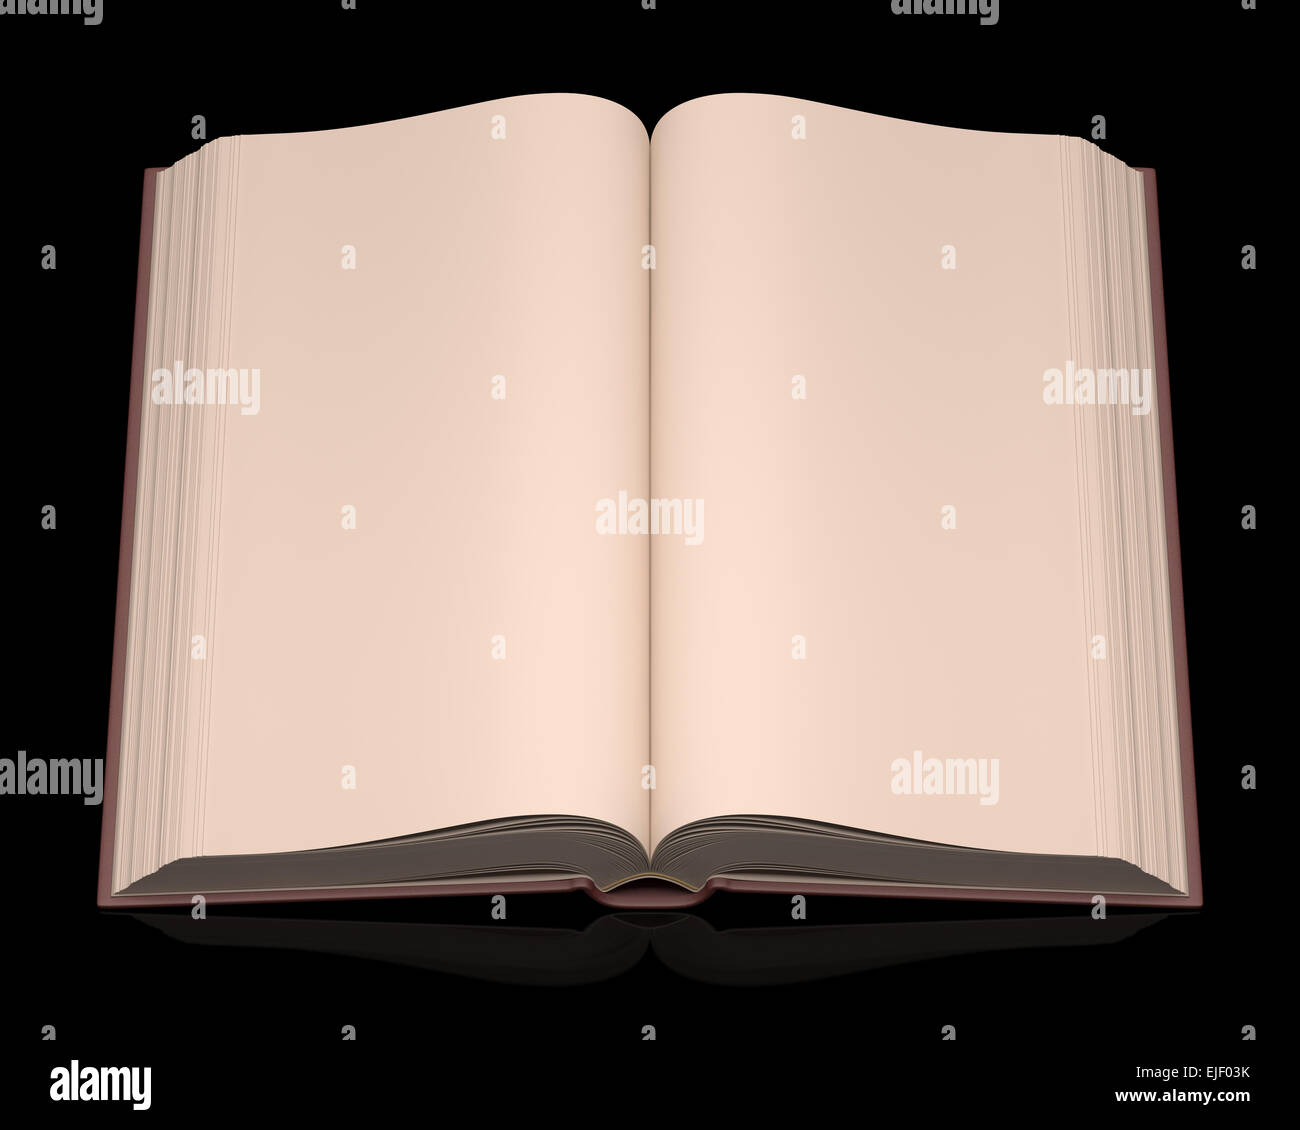 Open book without scriptures on top of a black background. Clipping path included. Stock Photo